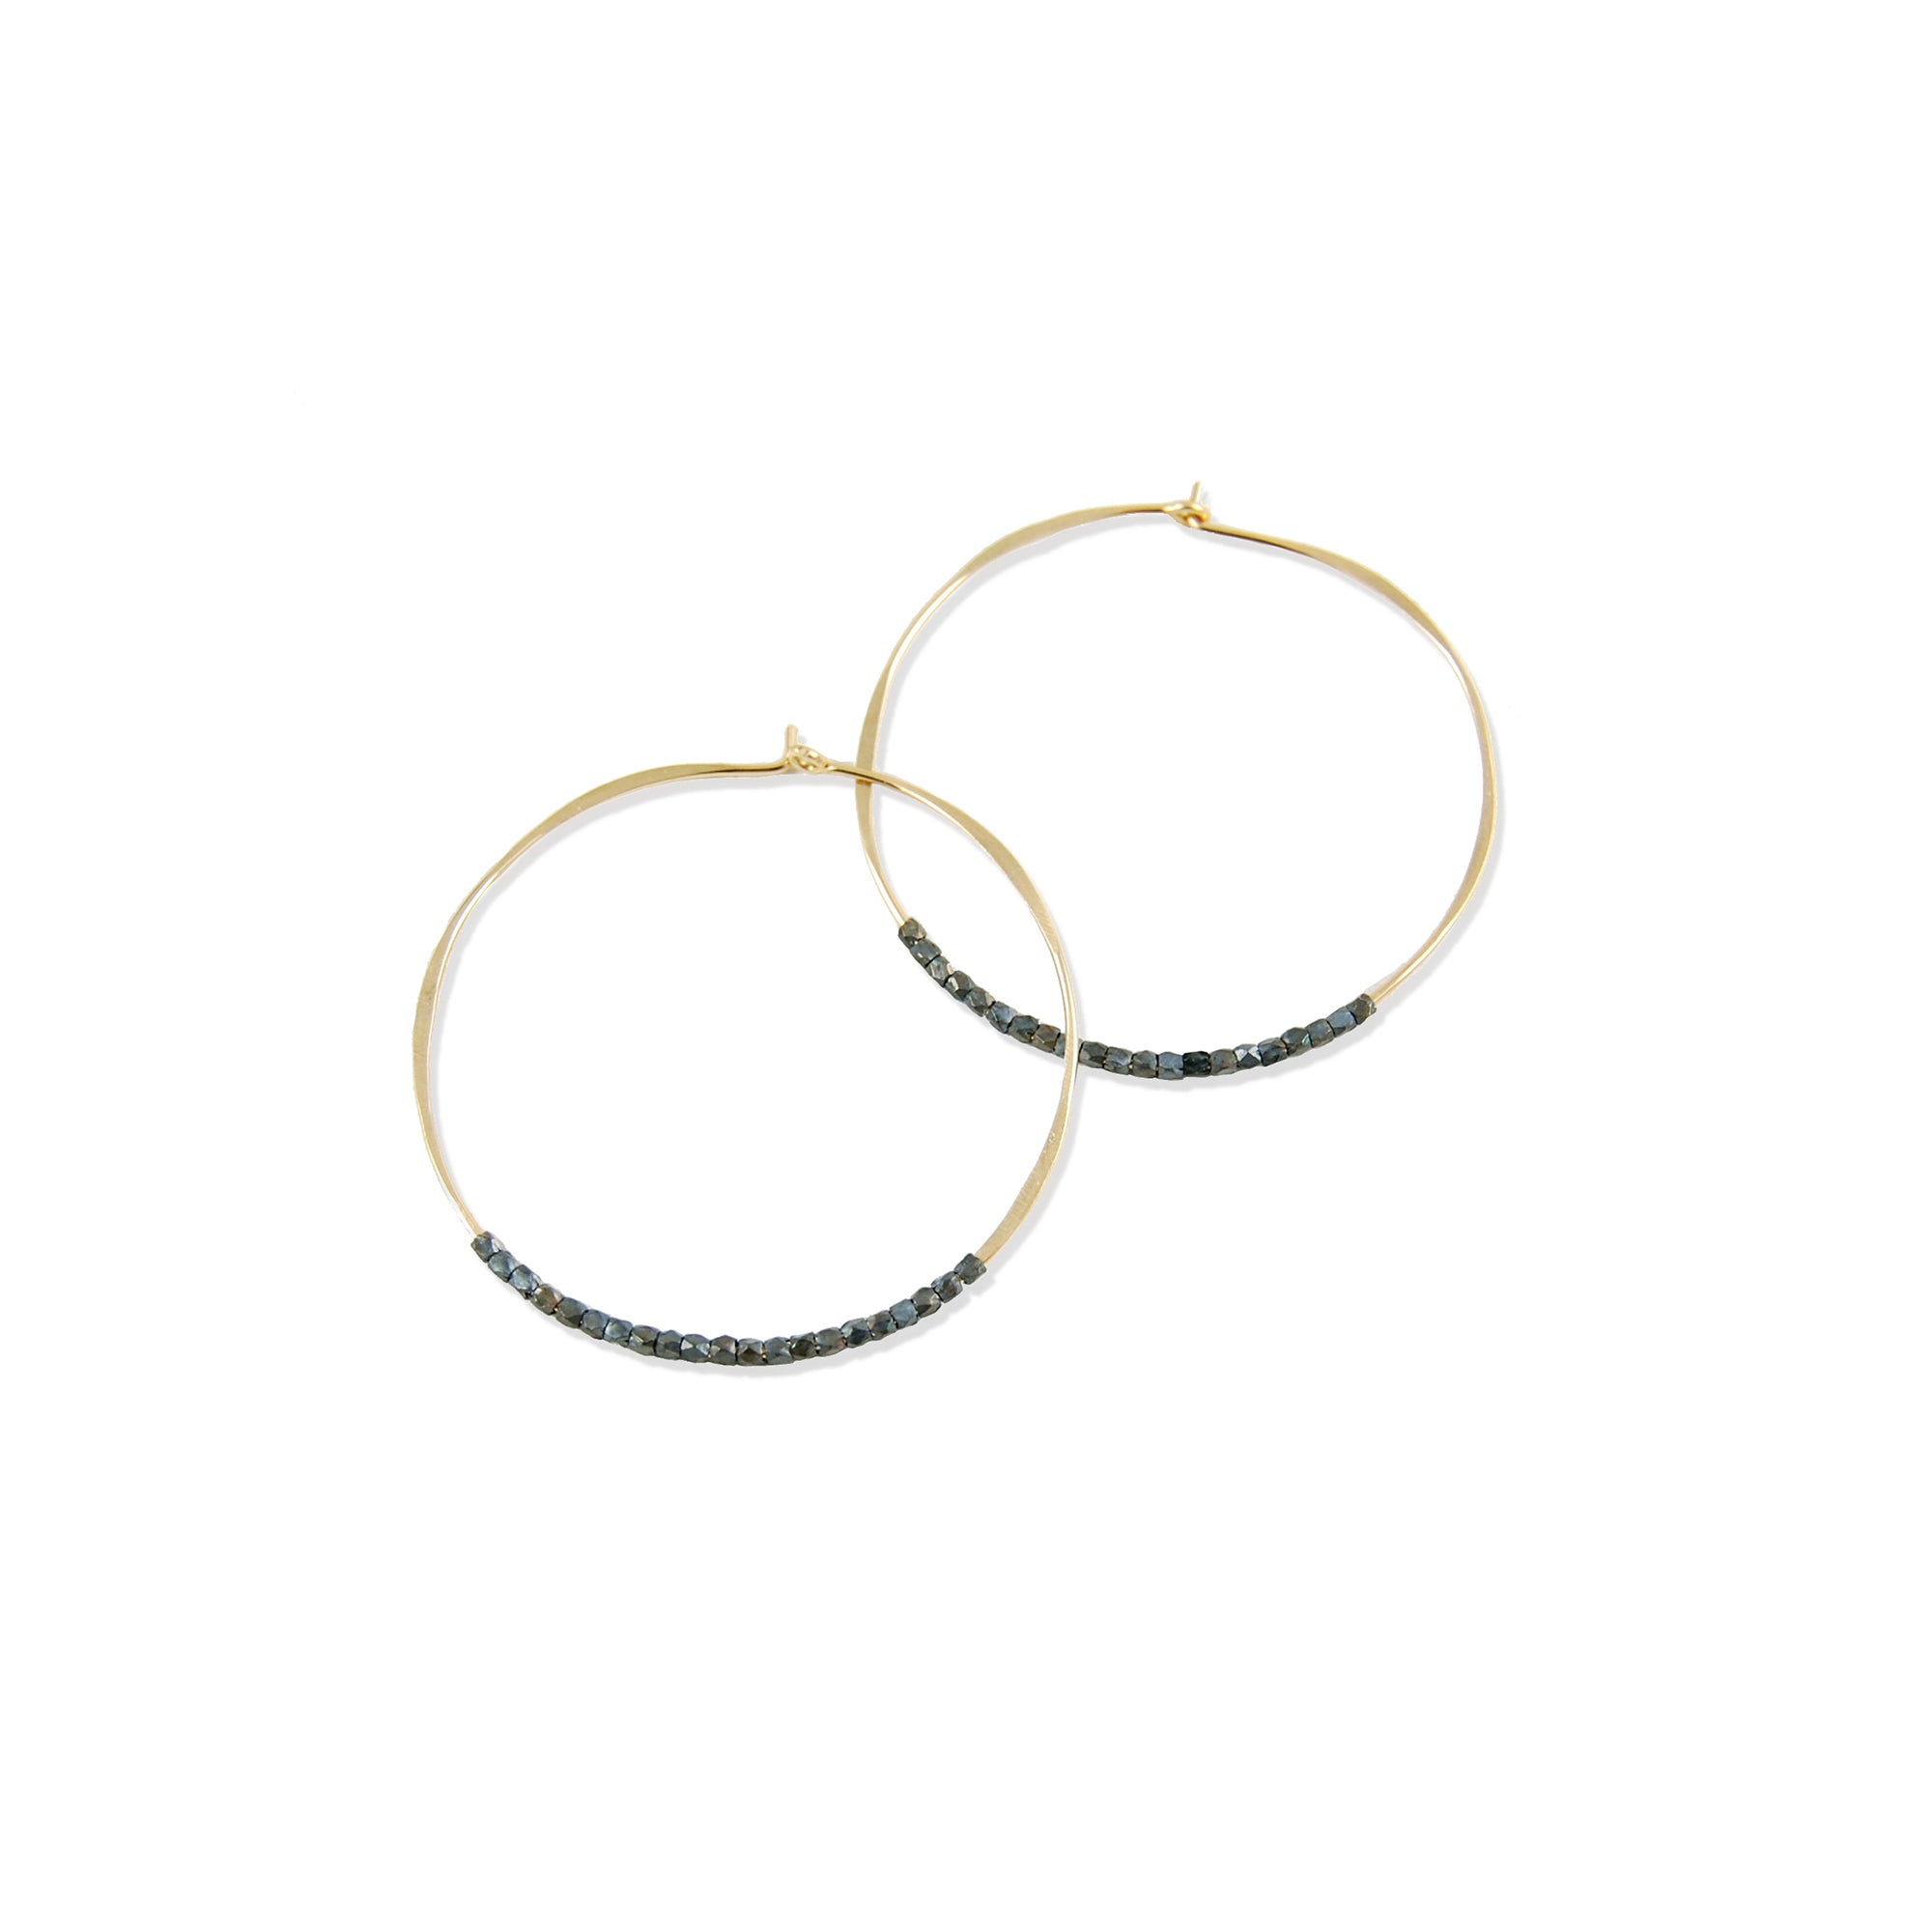 The Oxidized Bead Hoops are classic, lightweight earrings adorned with delicate oxidized sterling silver beads.